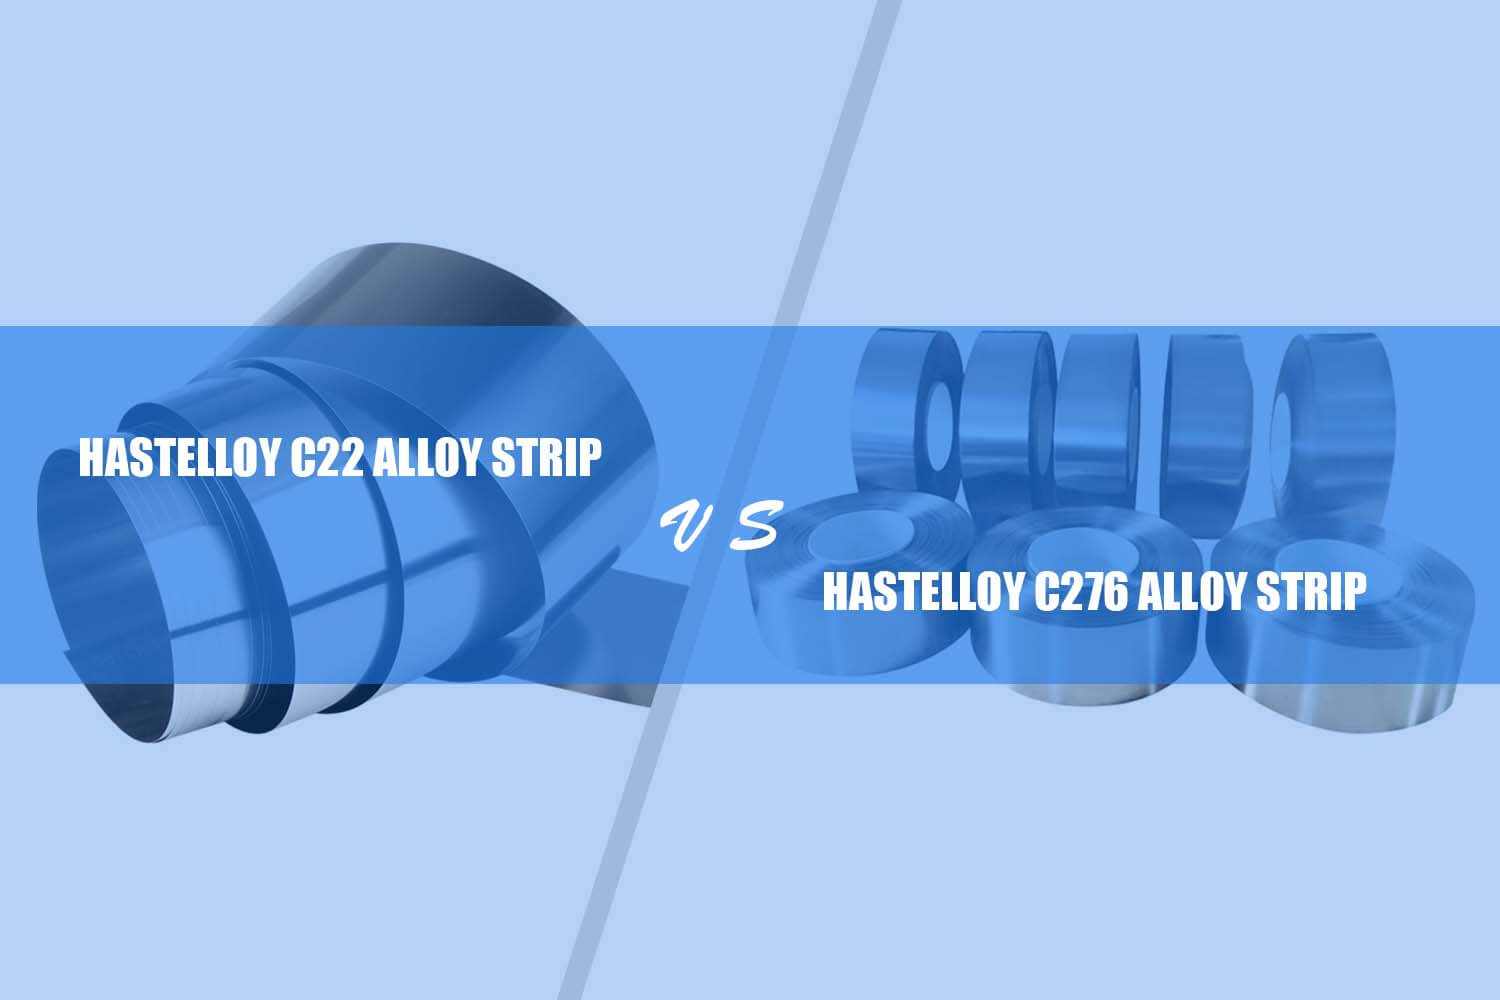 difference between hastelloy c22 and c276 alloy strip